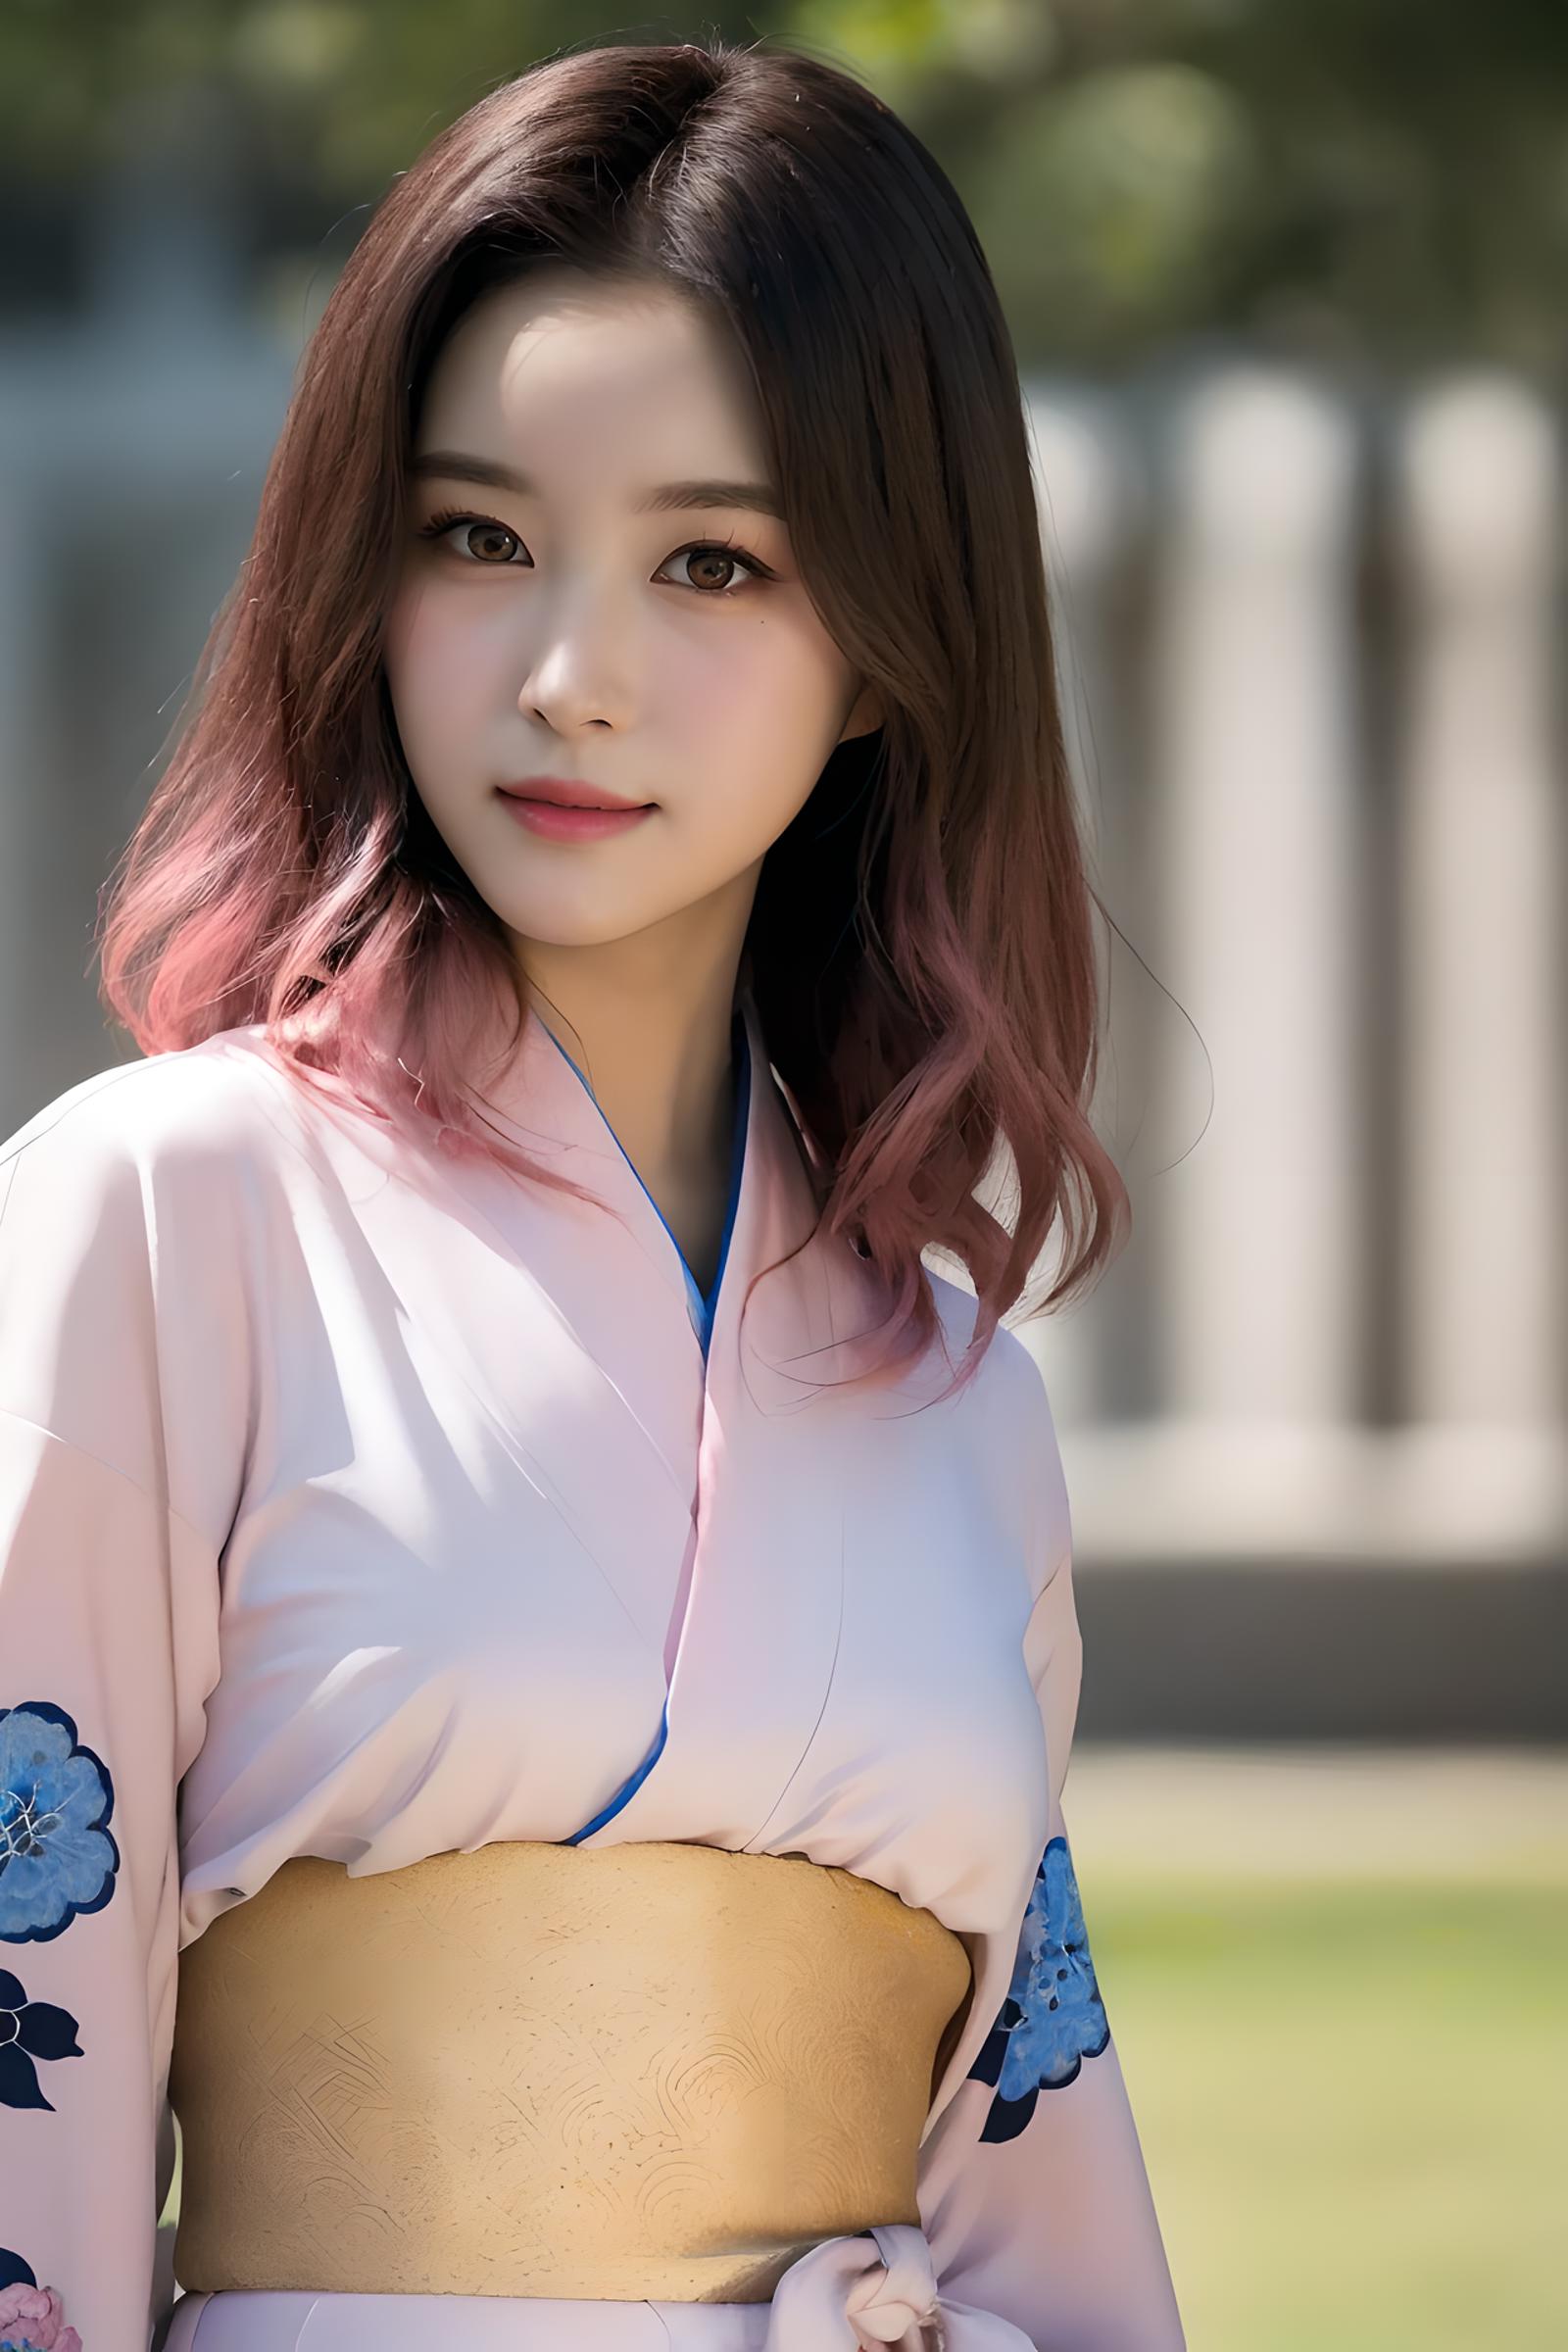 Not WJSN - Dayoung image by Tissue_AI